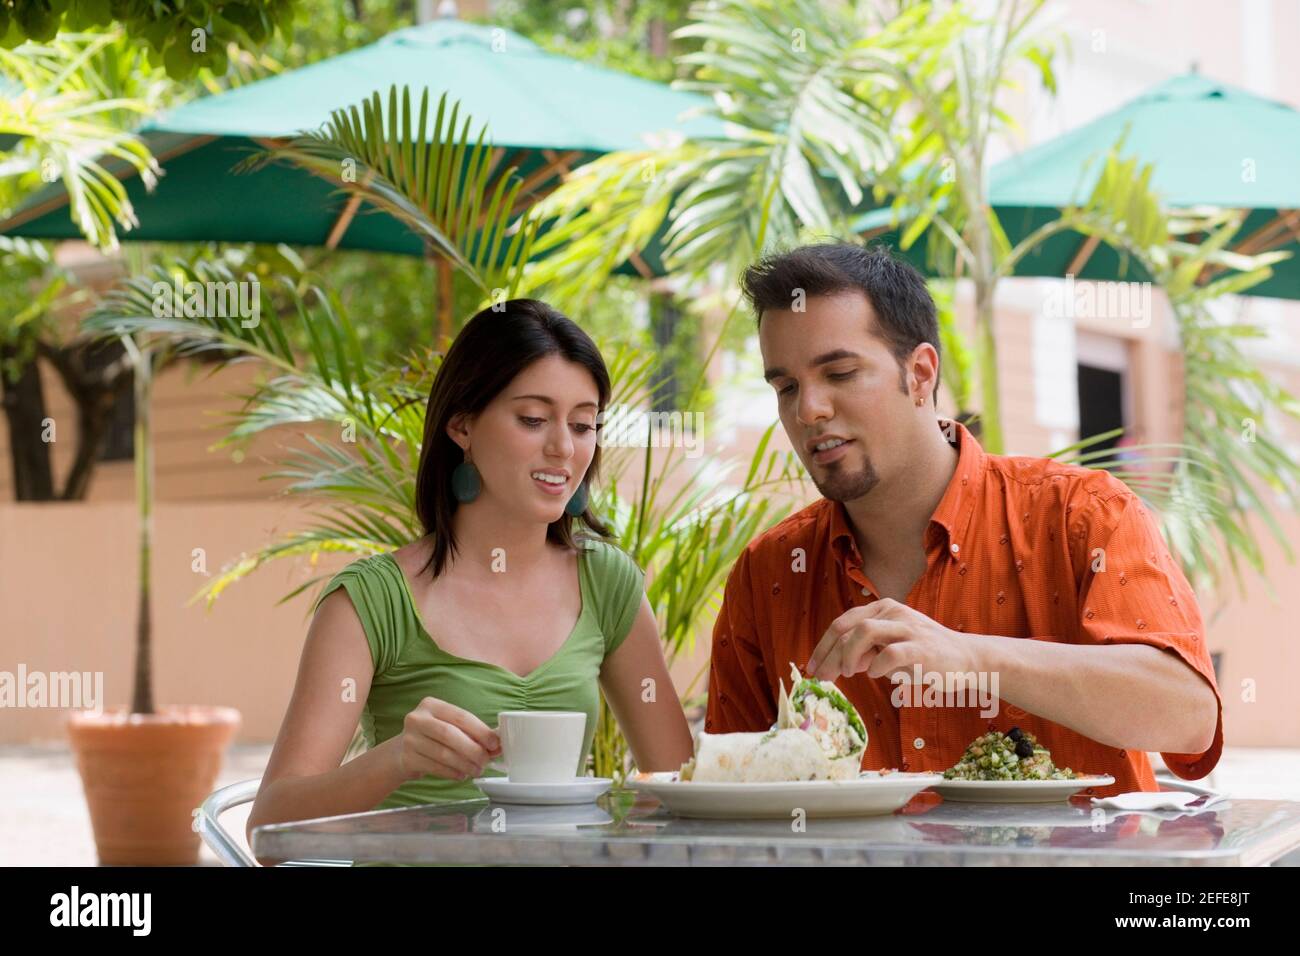 Teenage girl and a mid adult man sitting in a restaurant Stock Photo